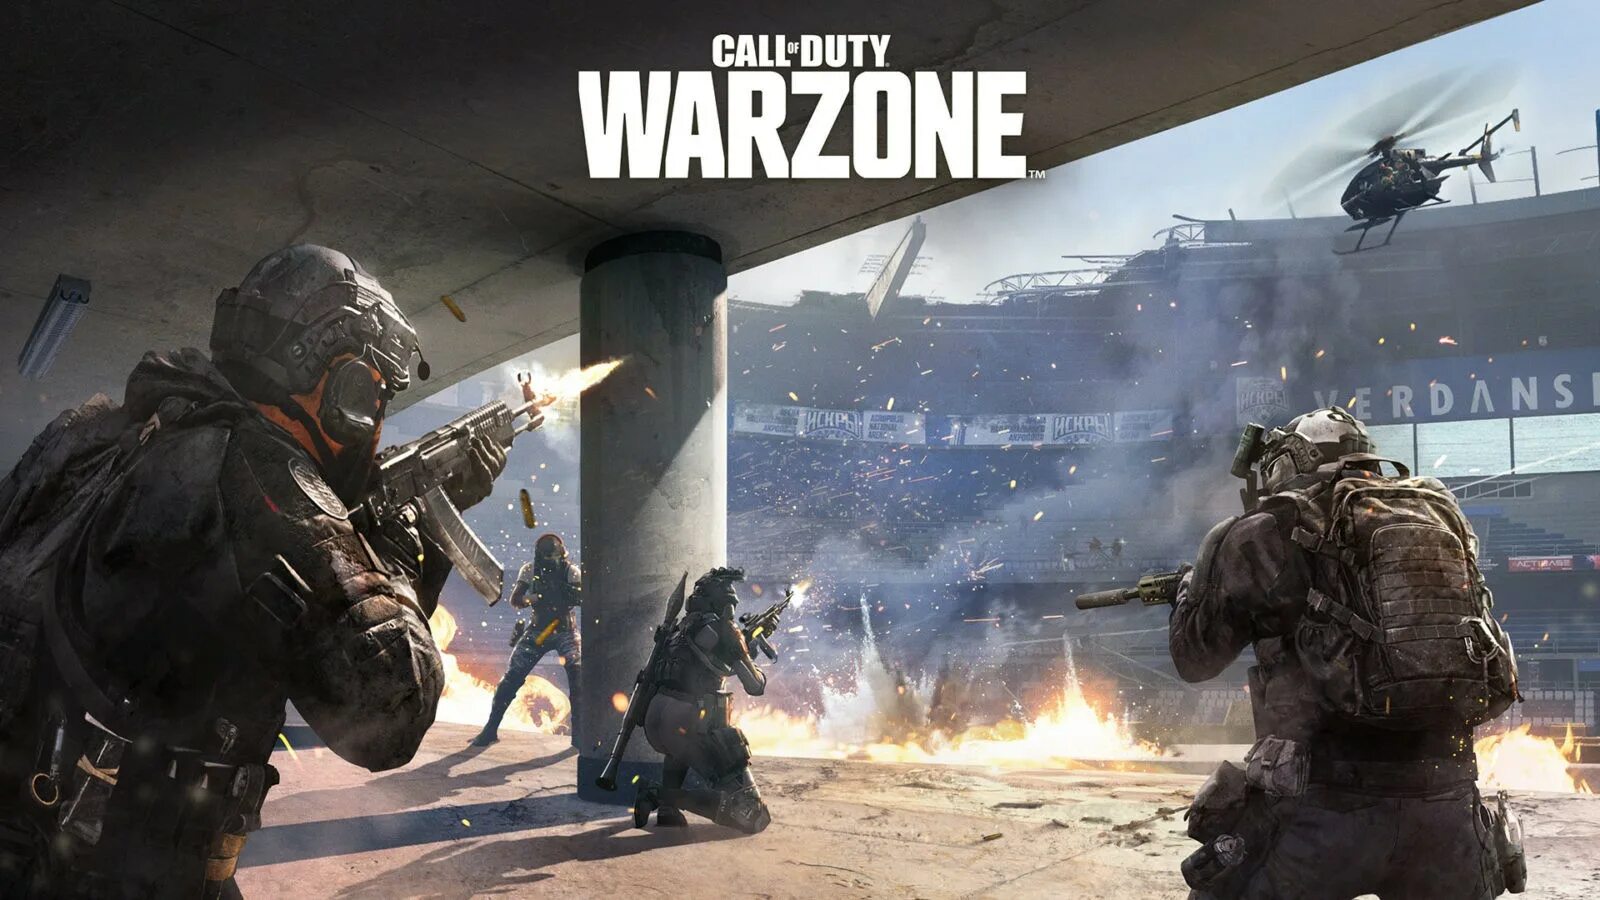 Call of Duty Warzone. Варзоне Call of Duty. Варзон 2 Call of Duty. Call of Duty 4 Modern Warfare Warzone. Call of duty warzone play